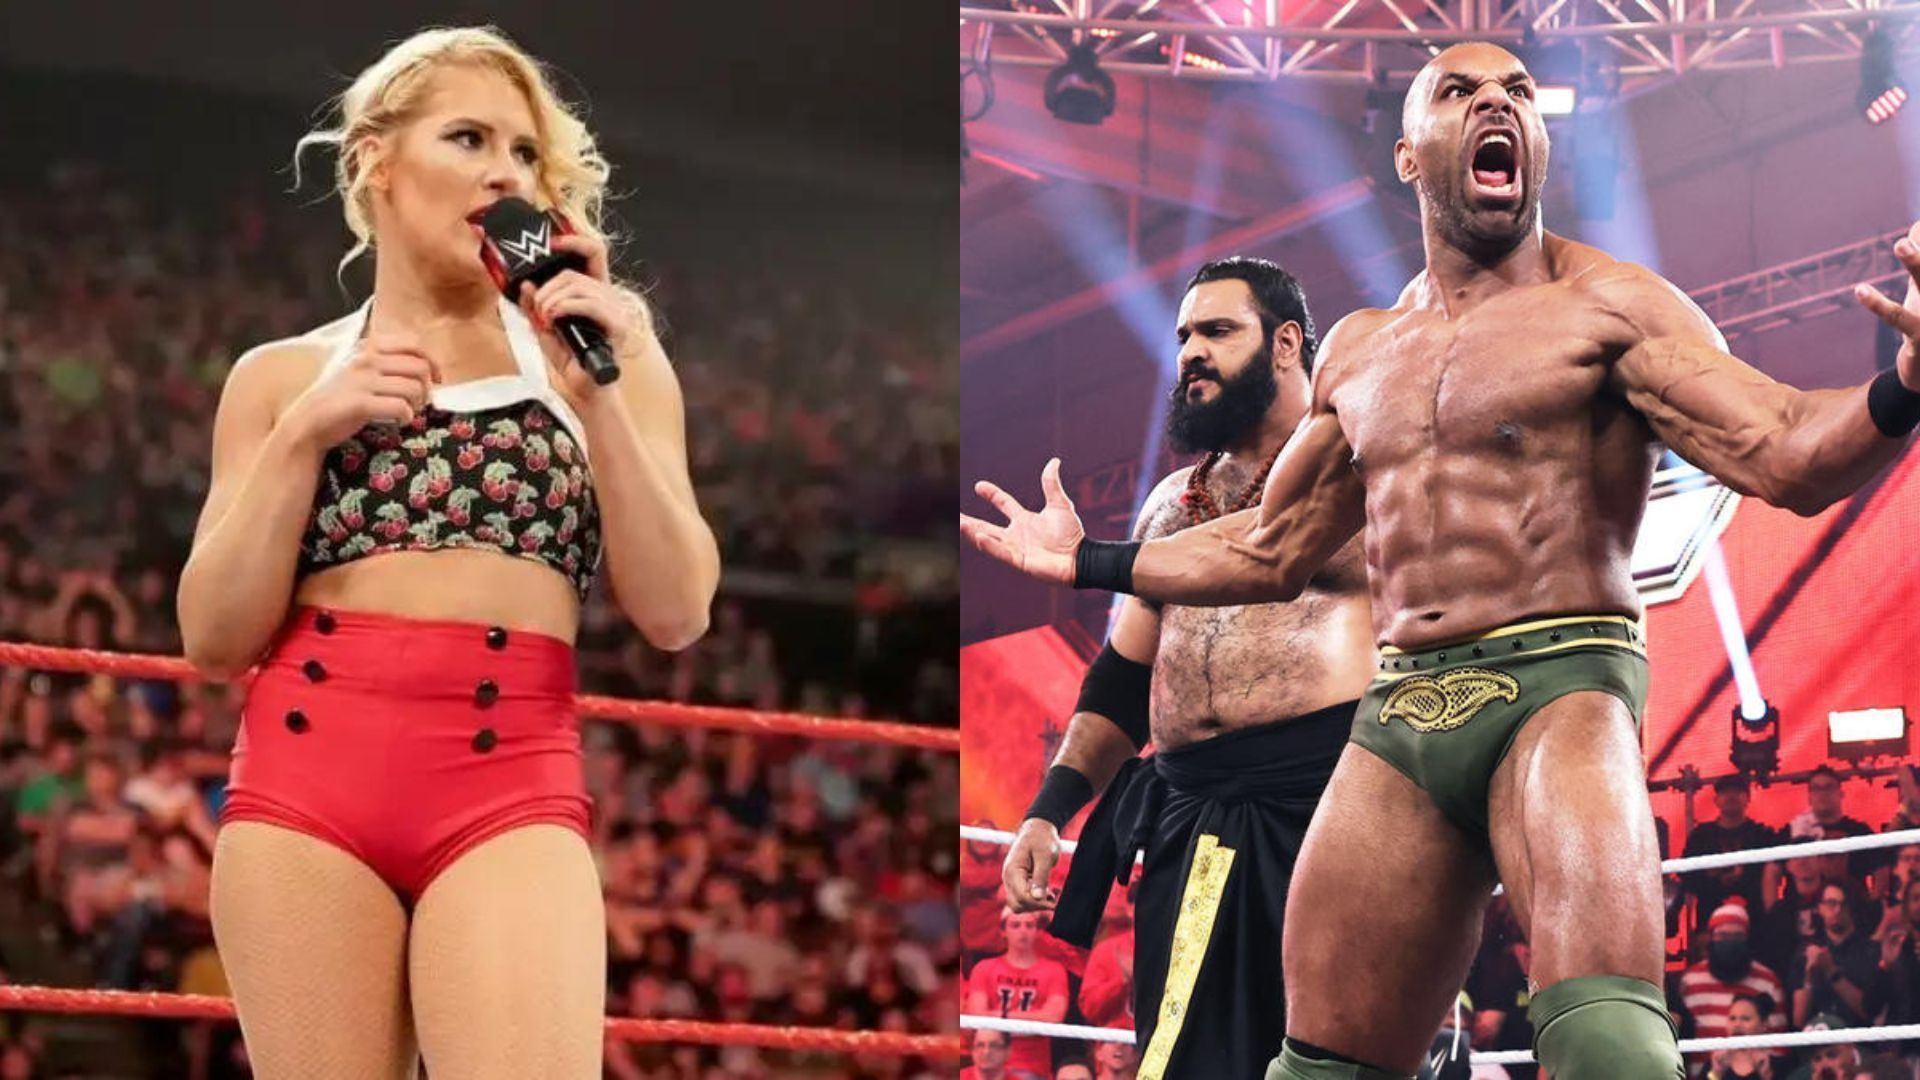 Lacey Evans is currenty working on SmackDown, whereas, Mahal has been moved to NXT